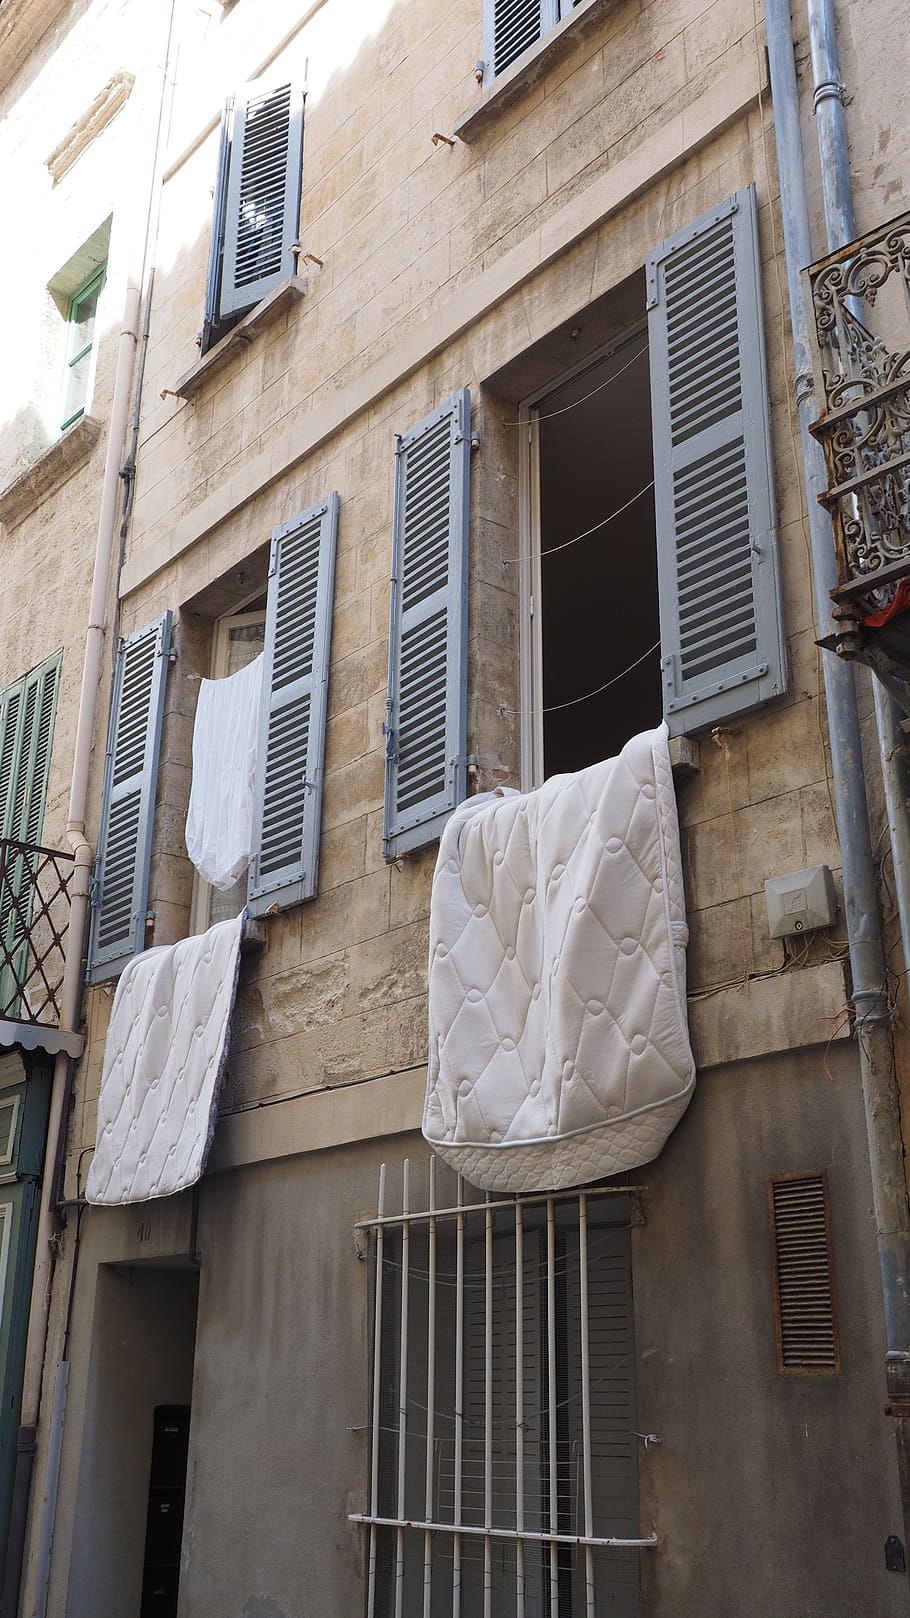 apartment, city, downtown, duvet covers, air, mediterranean, window, alley, road, shutters